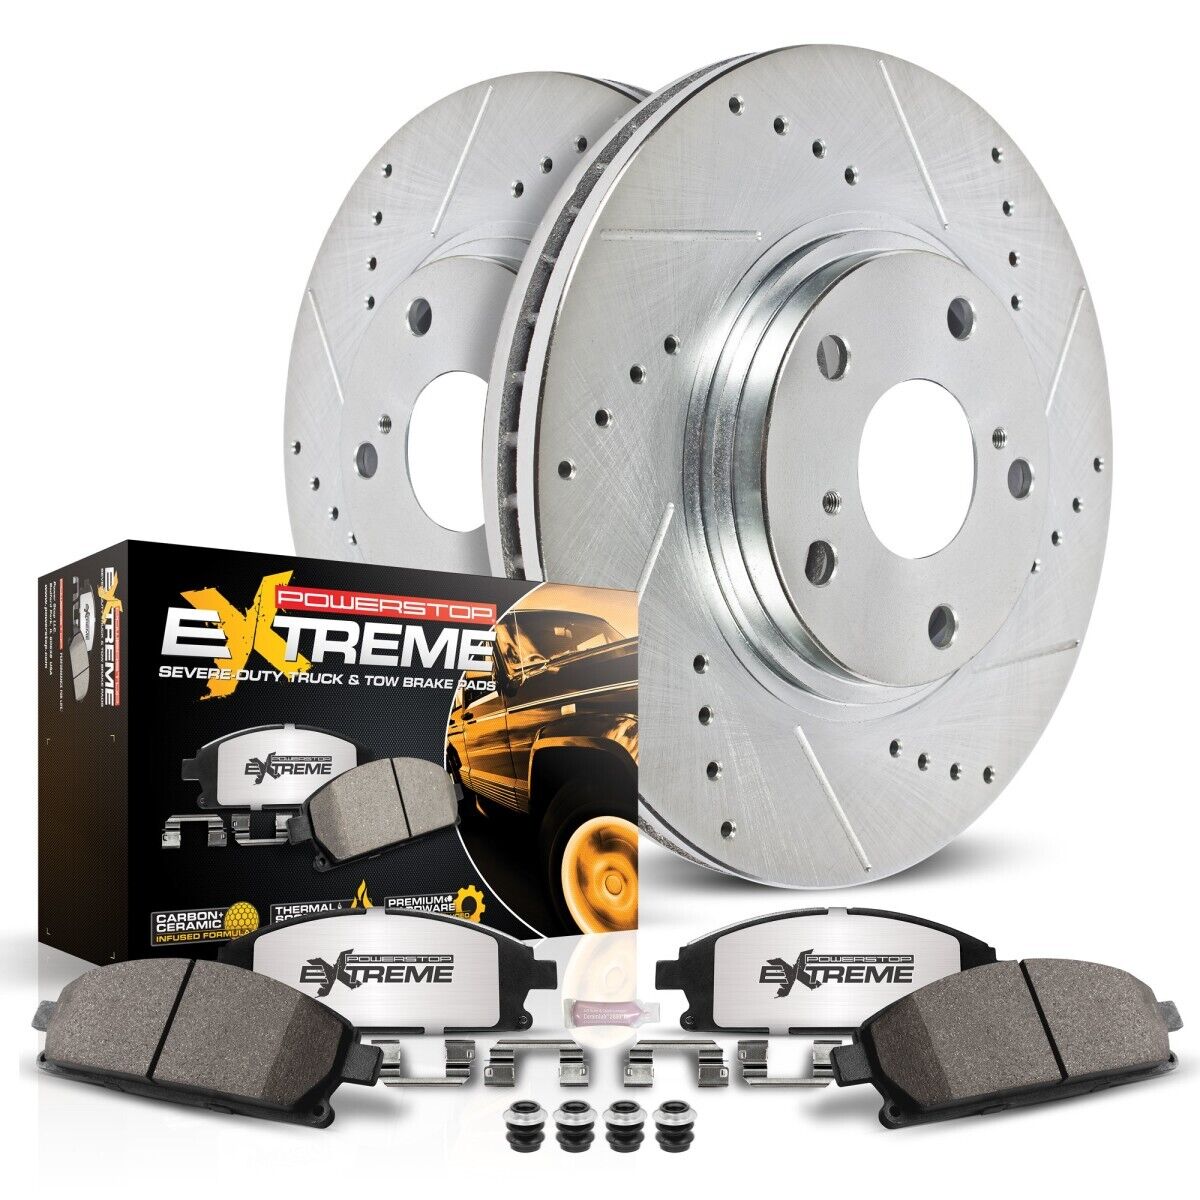 K4704-36 Powerstop Brake Disc and Pad Kits 2-Wheel Set Rear for Volvo S60 XC70